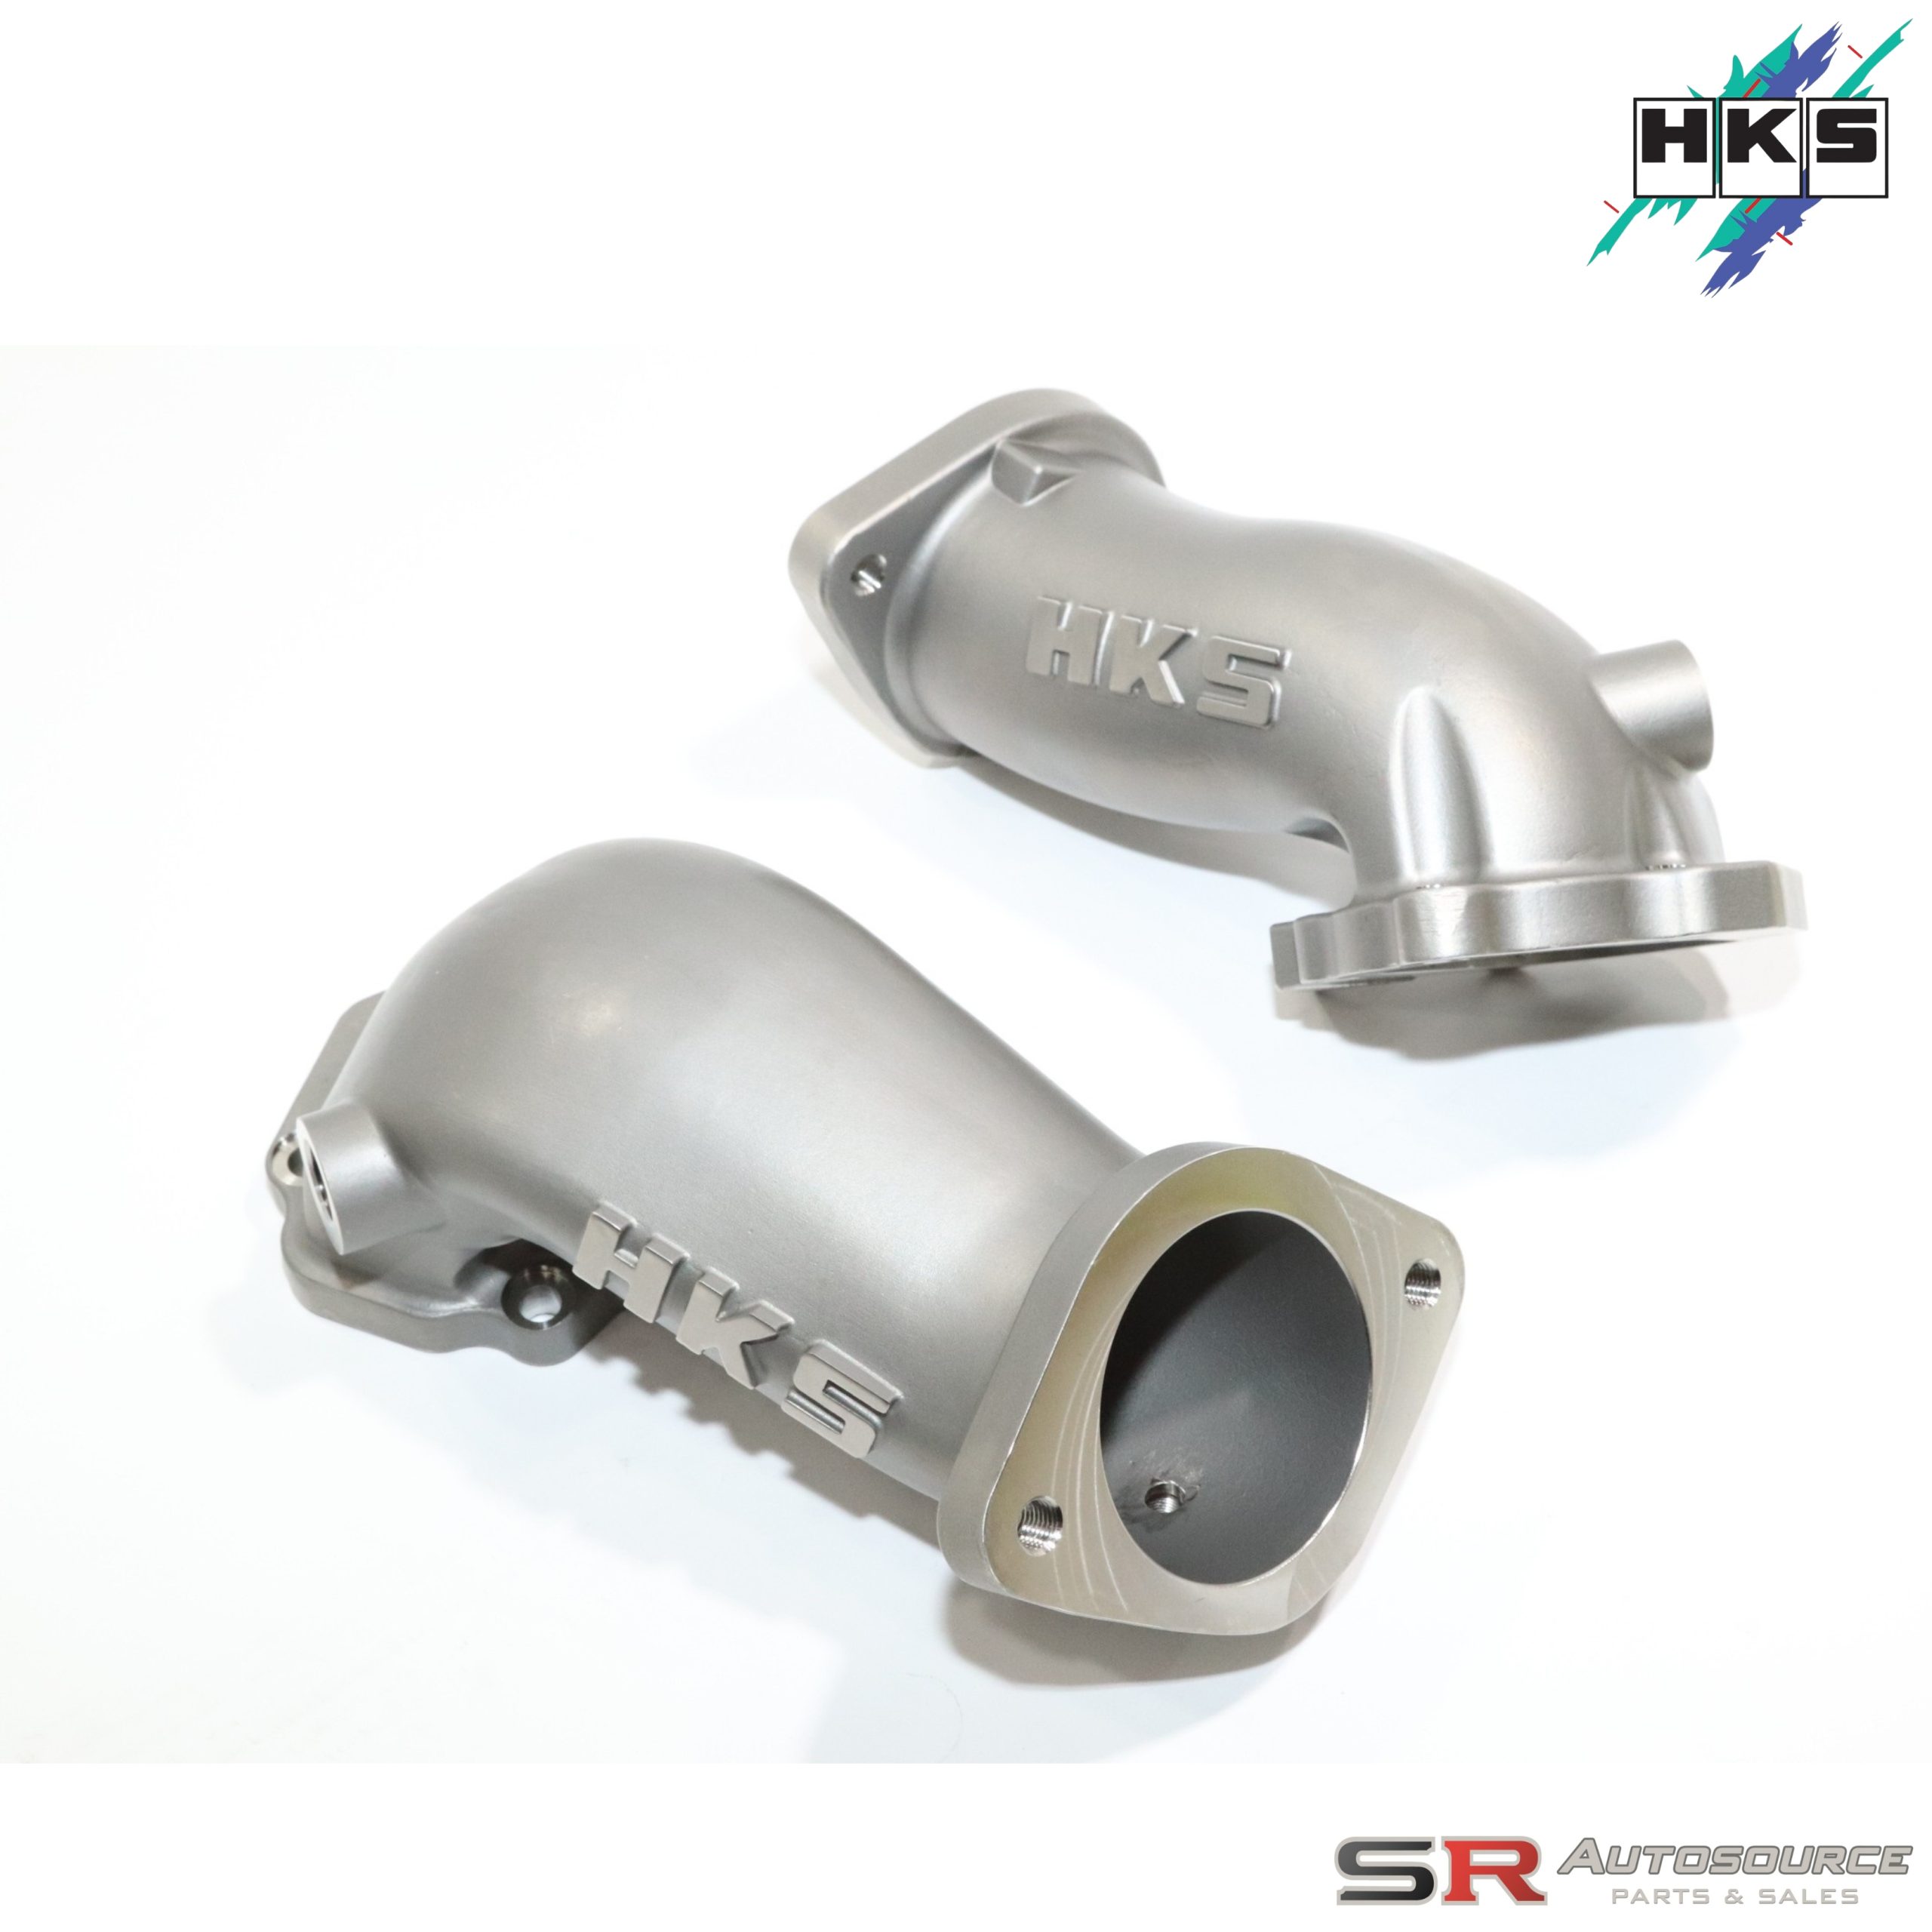 HKS Cast Turbo Outlet Extension Elbow Pipes for Skyline GTR with HKS GTIII Turbo Setup